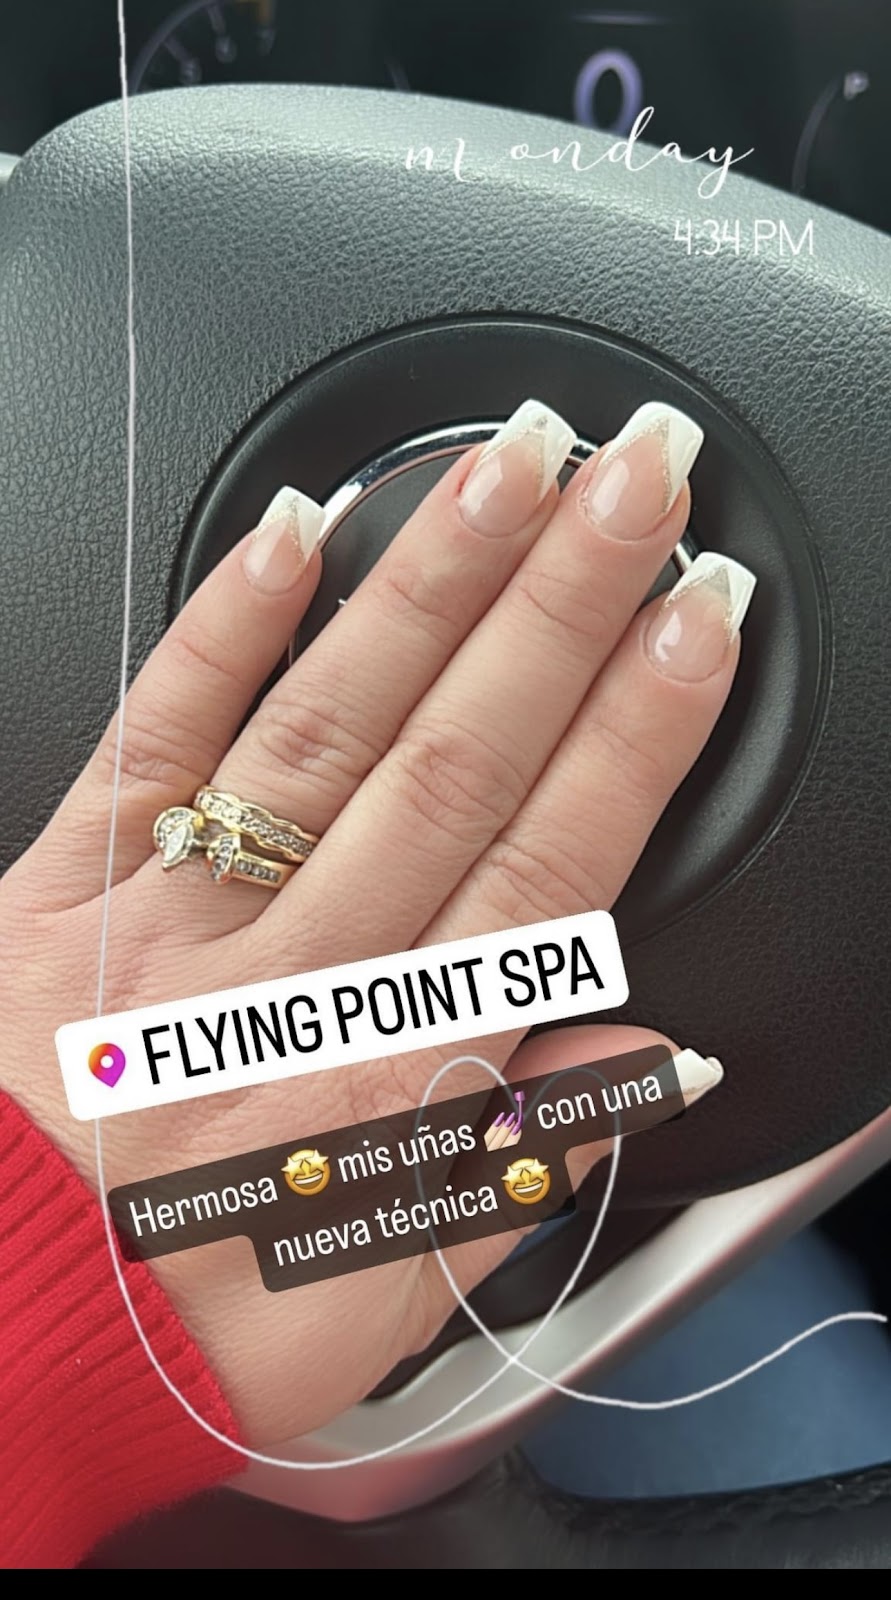 Flying Point Spa | 609 suite 3 Hampton Rd, Southampton, NY 11968 | Phone: (631) 726-0650